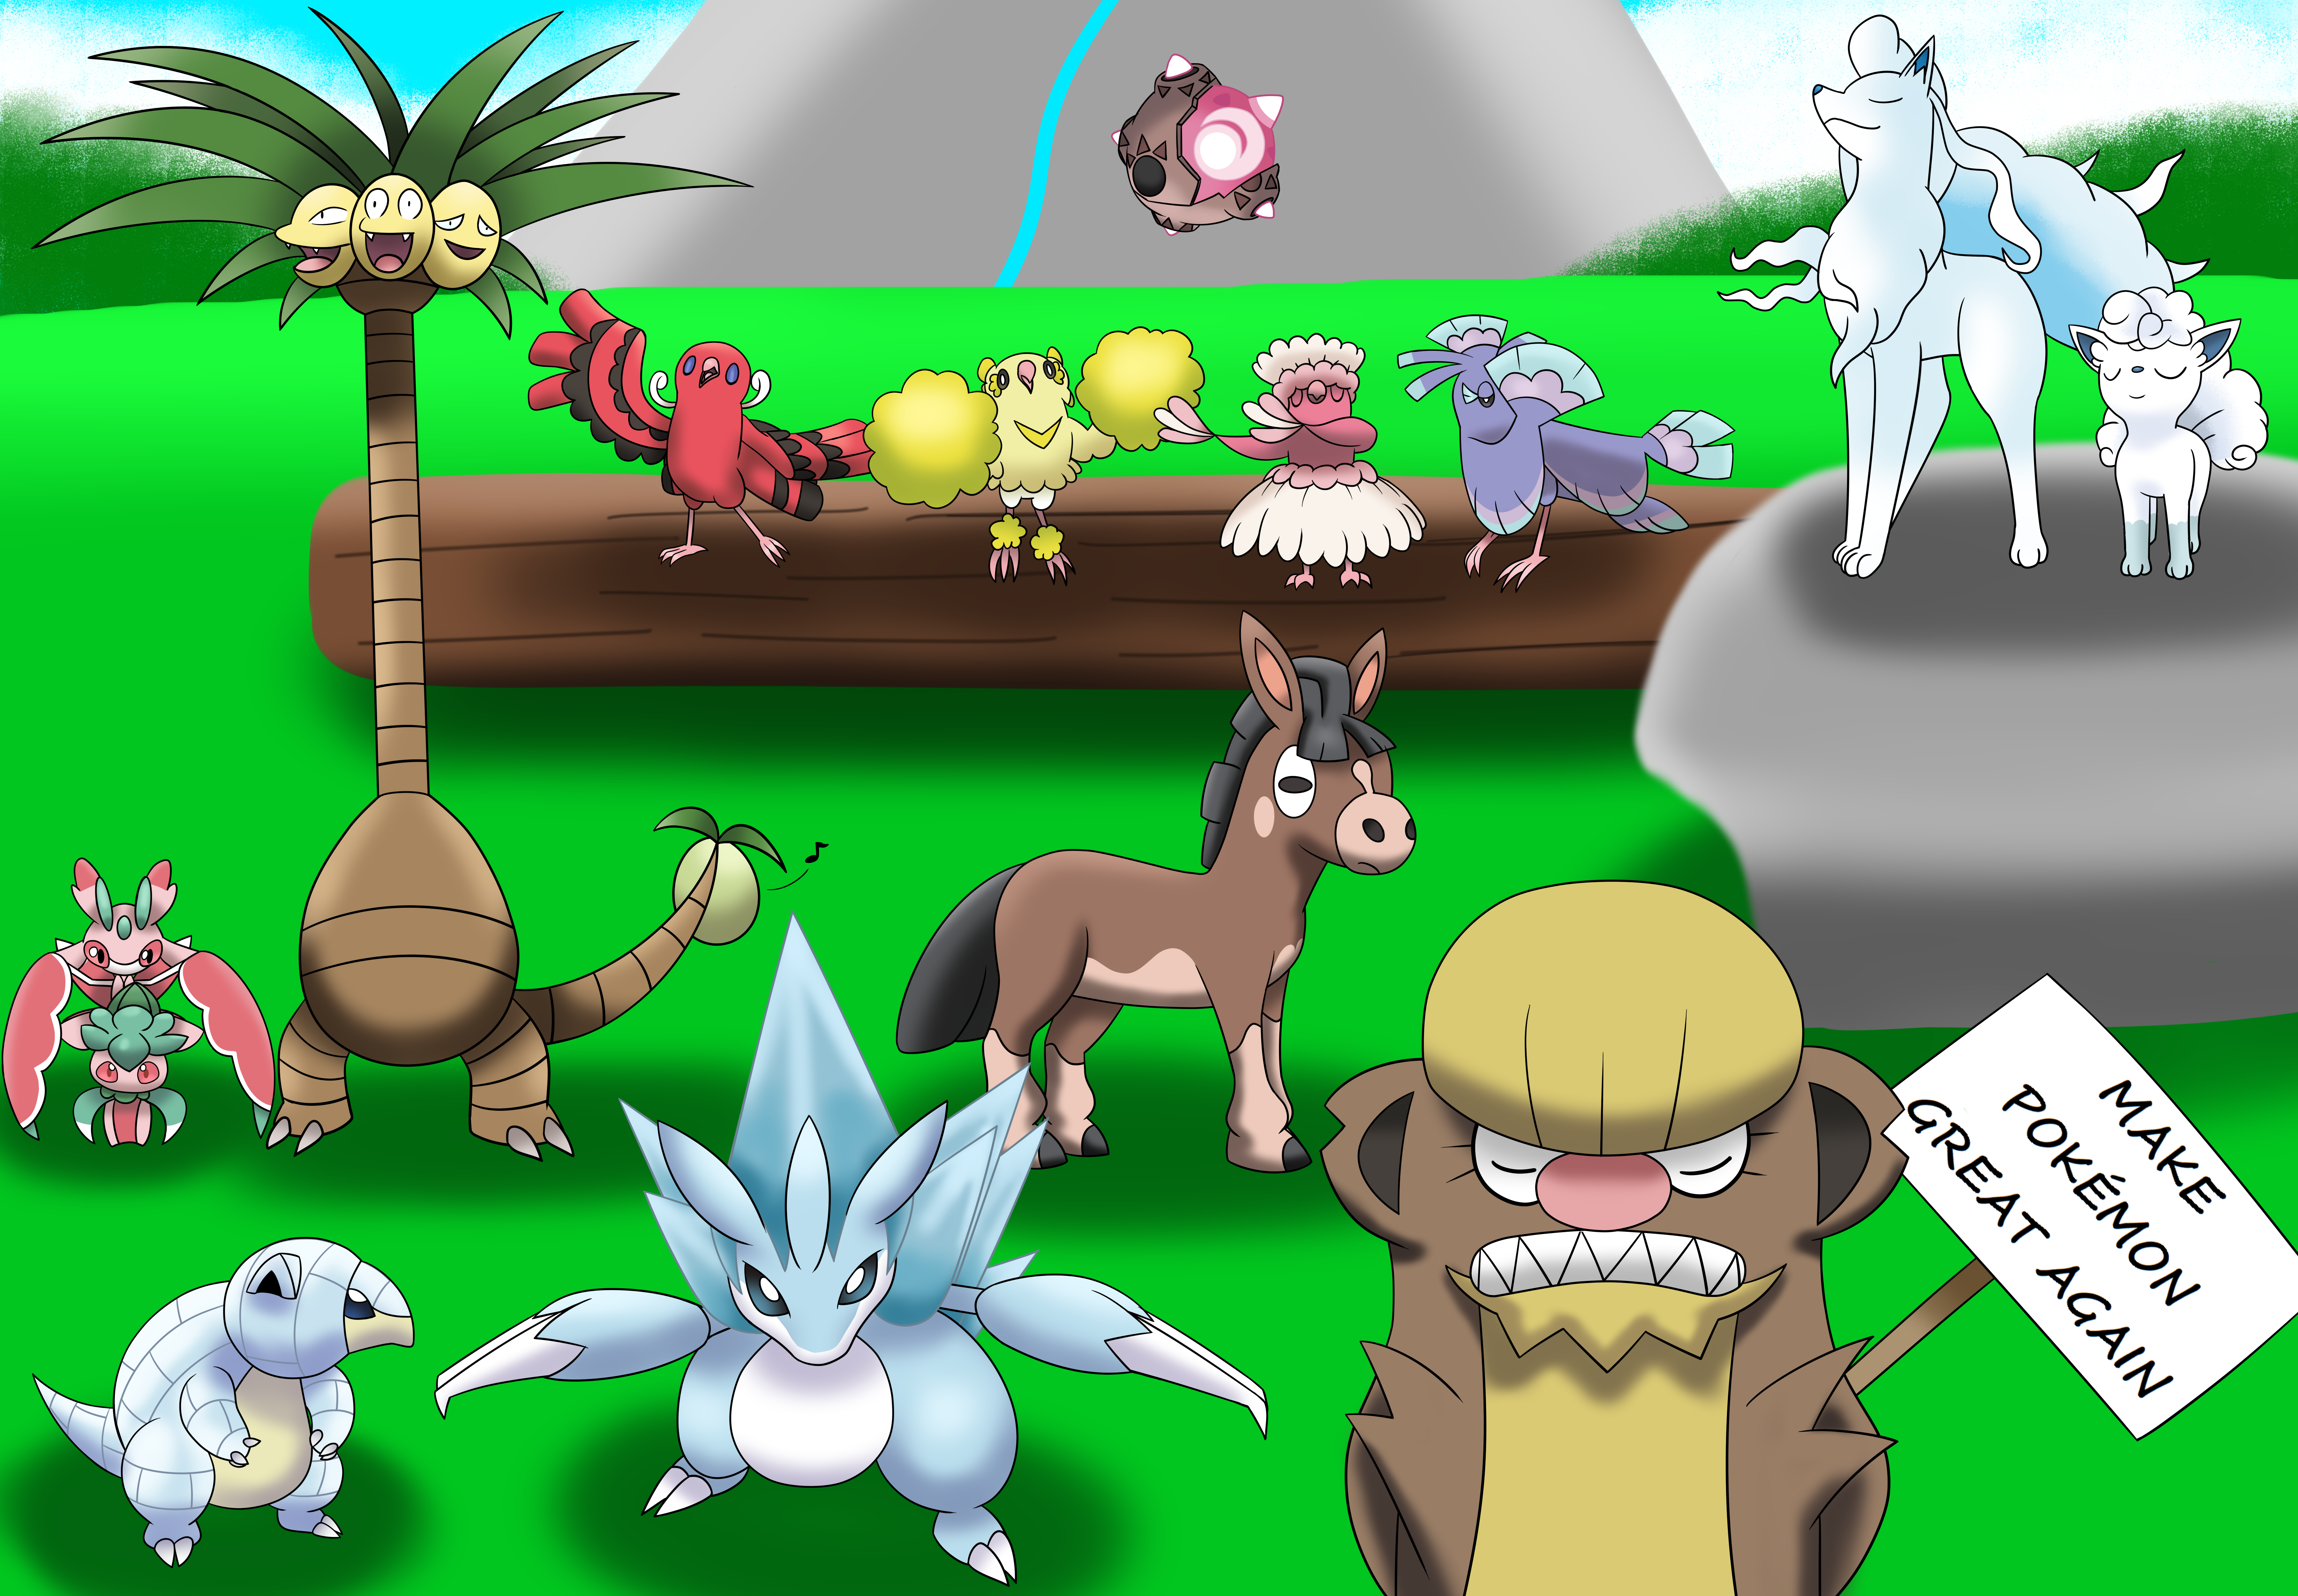 Play New forms Pokemon Alola for free without downloads